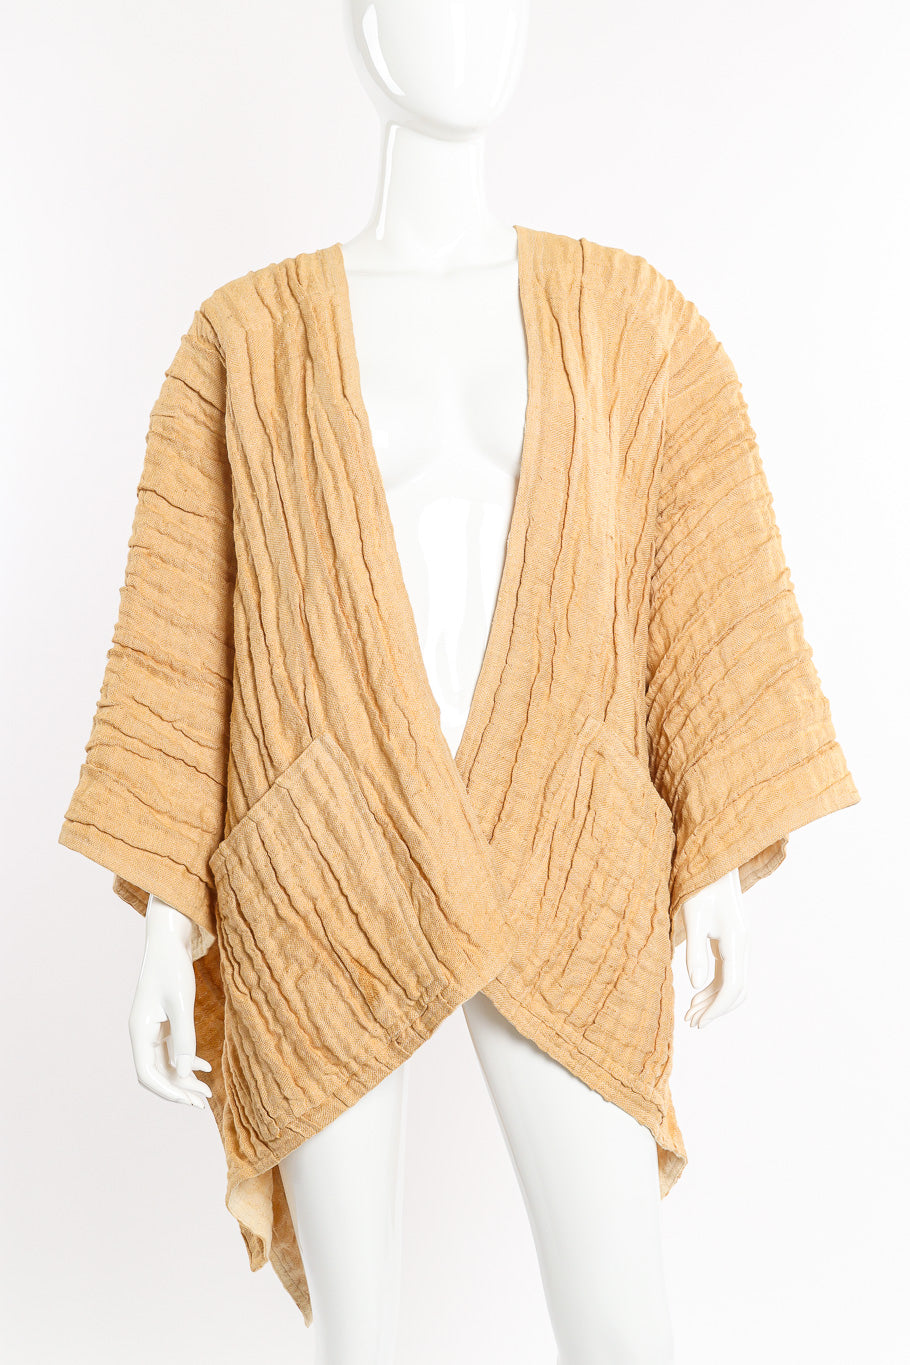 Issey Miyake Flax Linen Pleated Kimono front view on mannequin closeup @Recessla